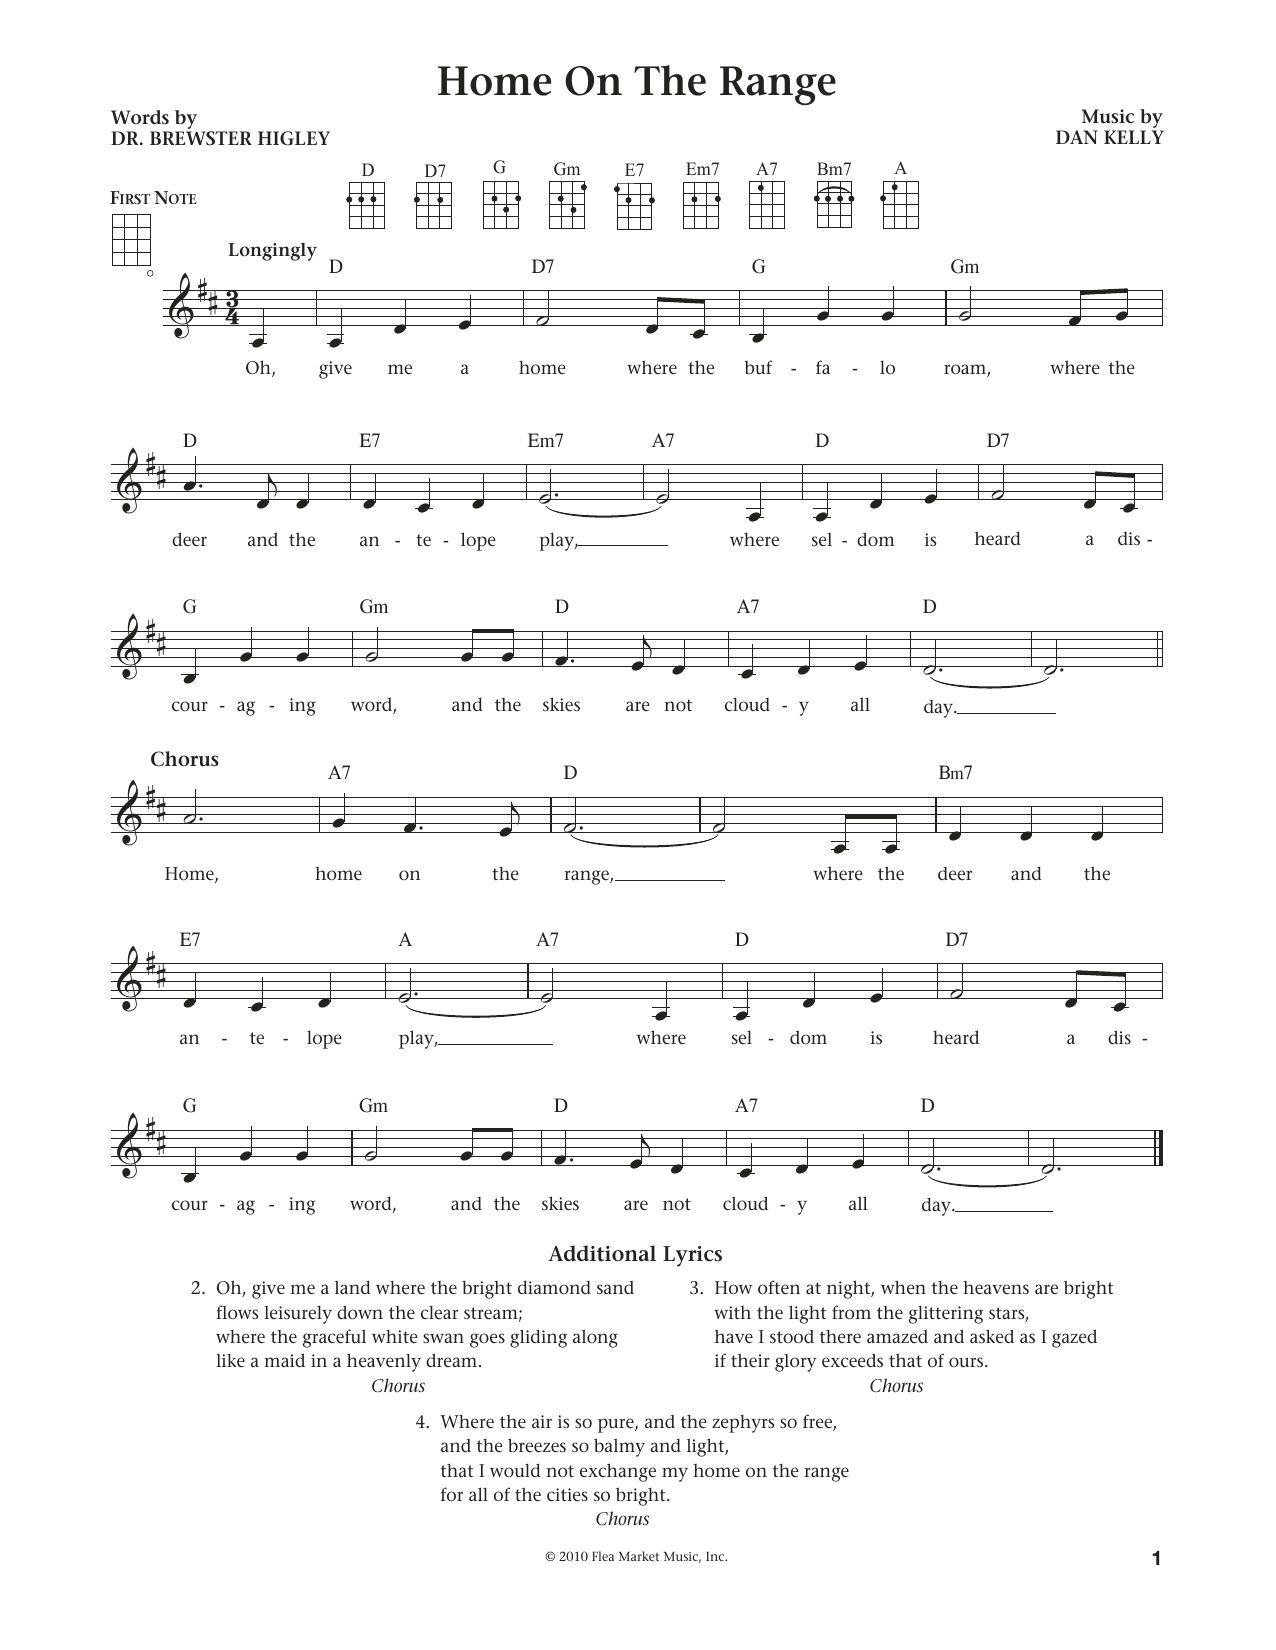 Download Dan Kelly Home On The Range (from The Daily Ukule Sheet Music